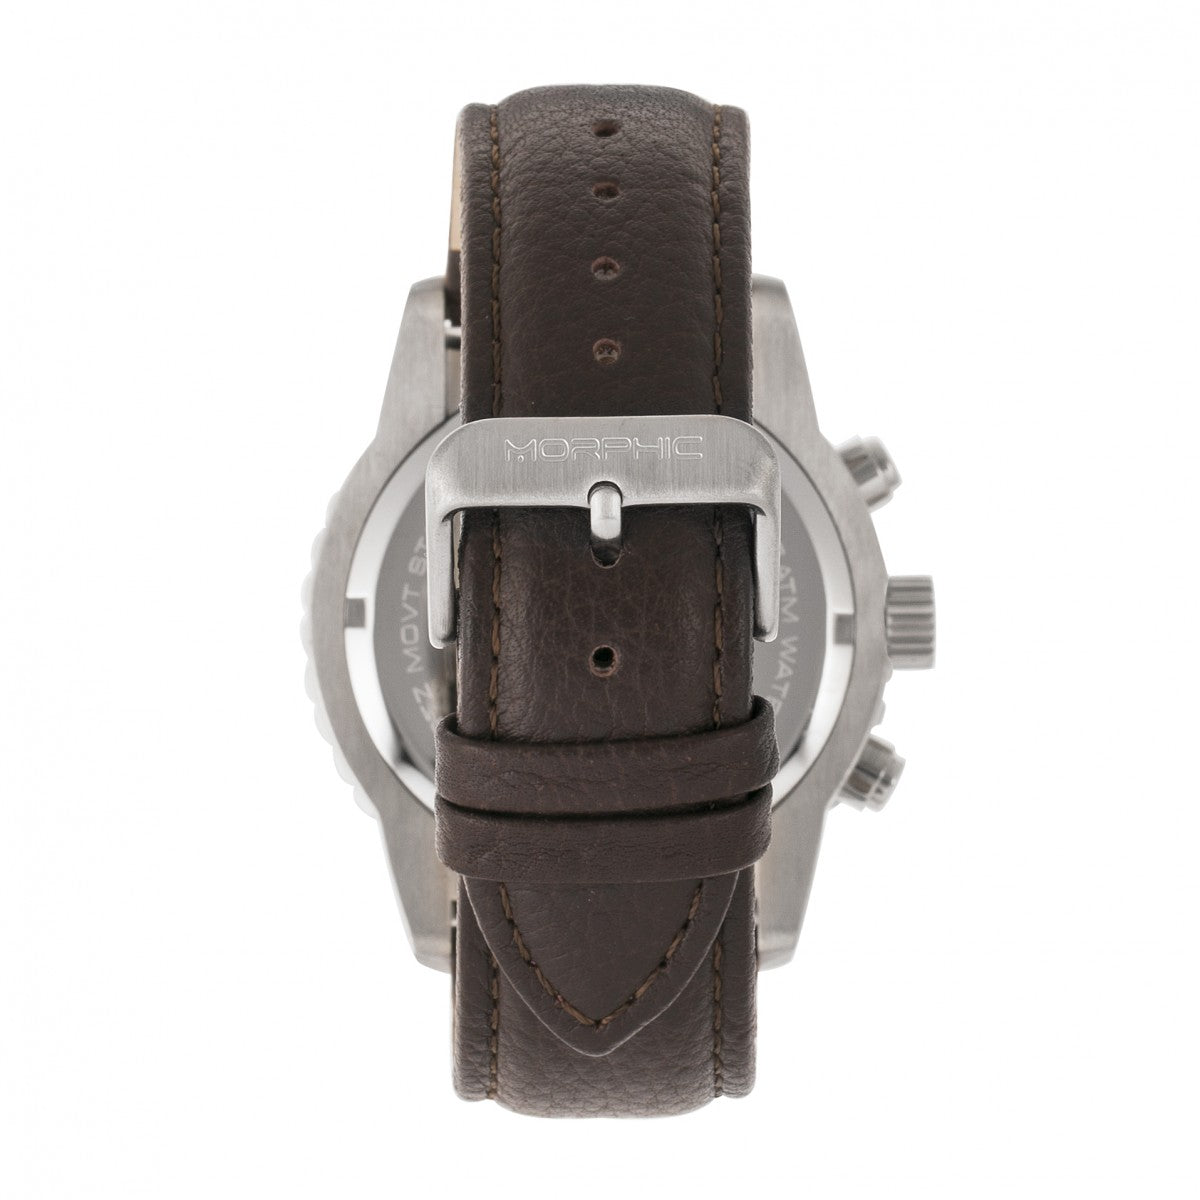 Morphic M67 Series Chronograph Leather-Band Watch w/Date - Silver/Brown - MPH6702